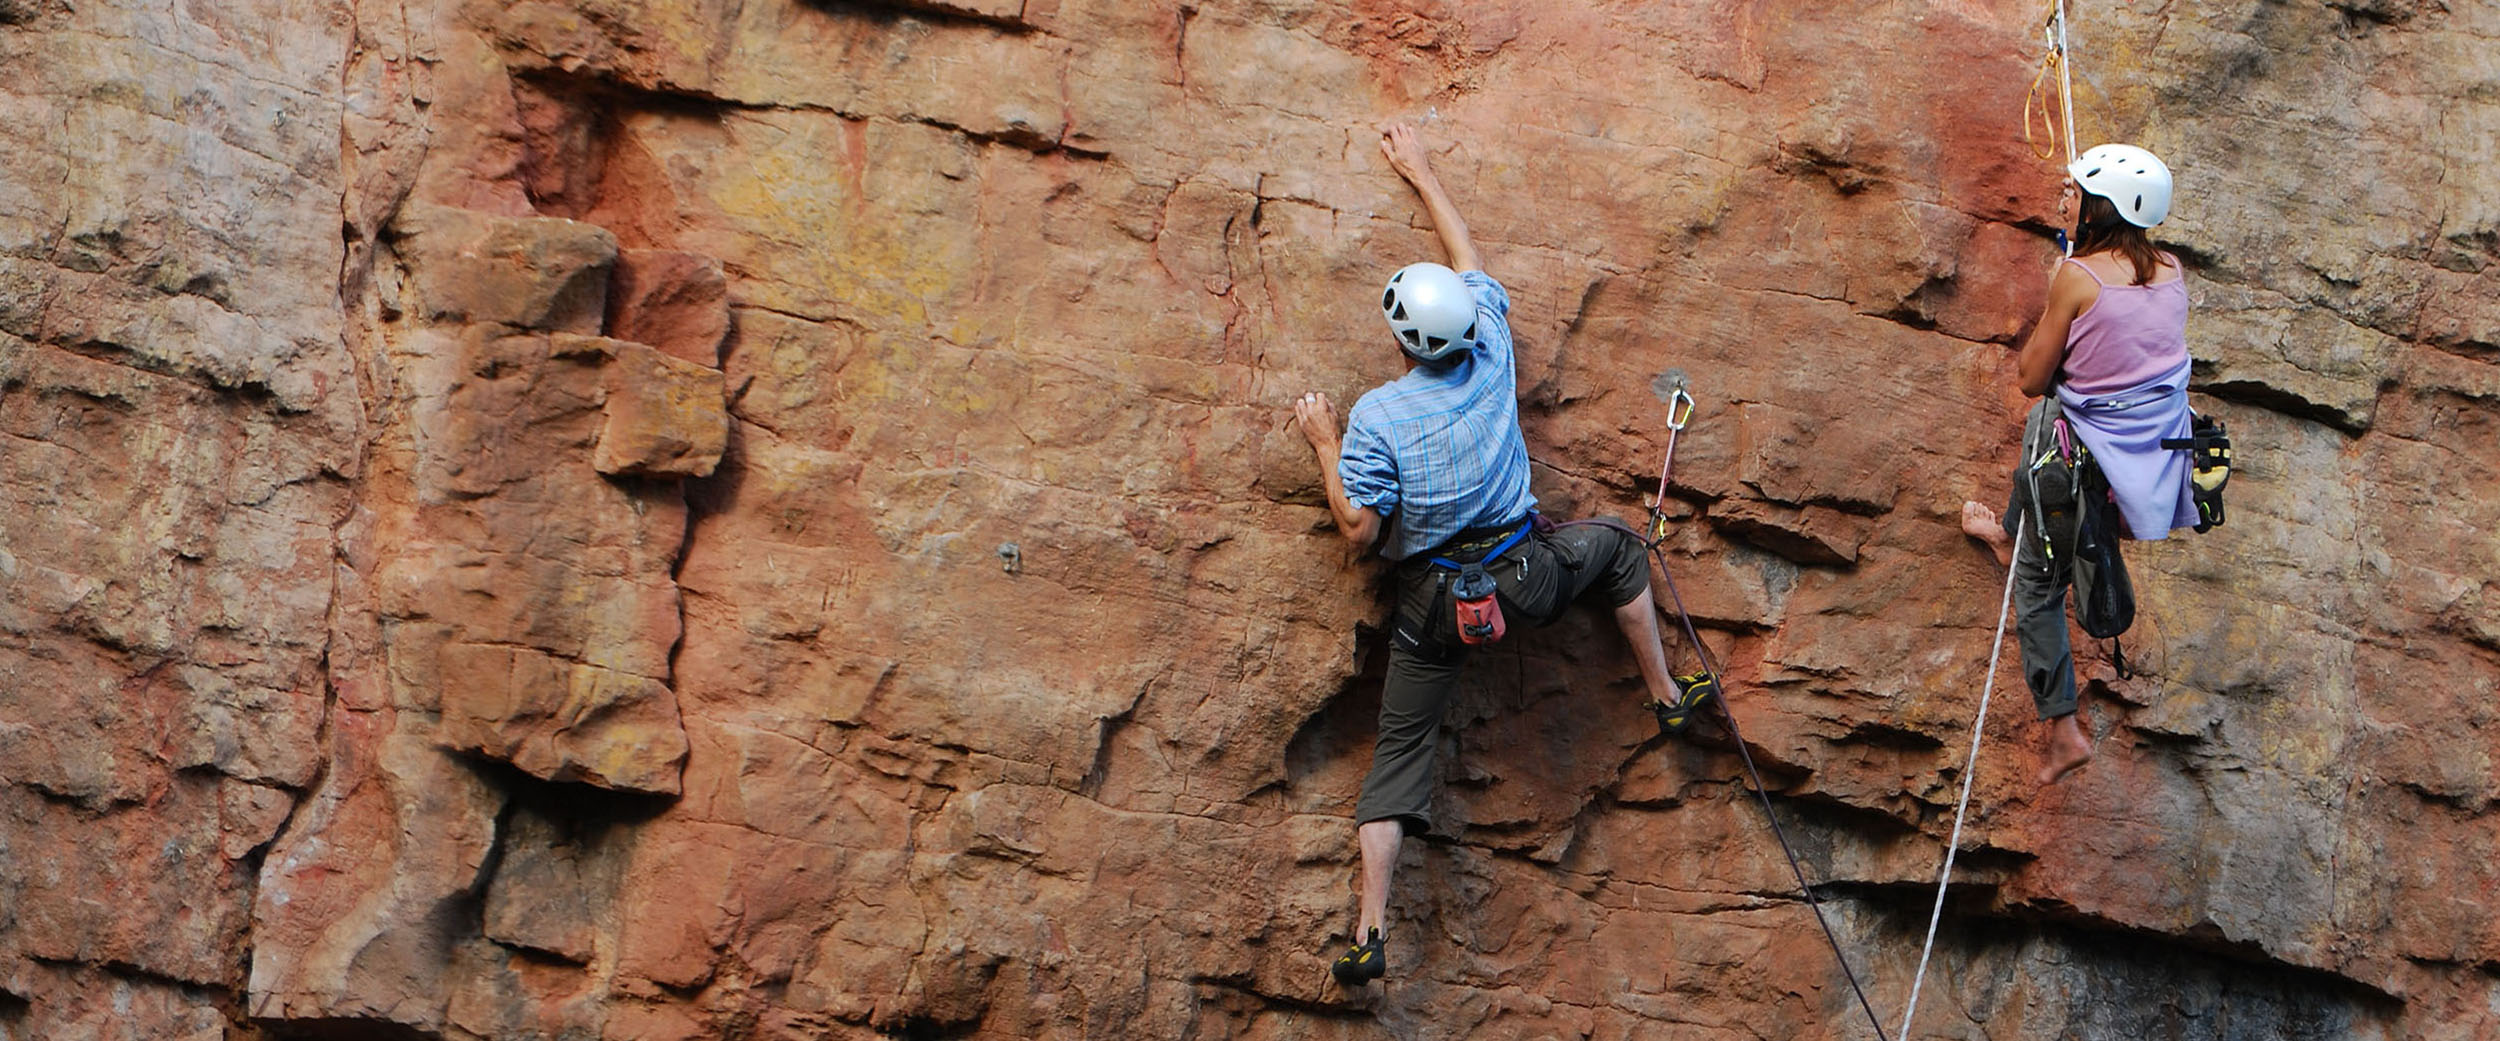 A climbing instructor hangs from a rope and offers advice to their client. The client appears to climbing through a difficult section on a sheer face